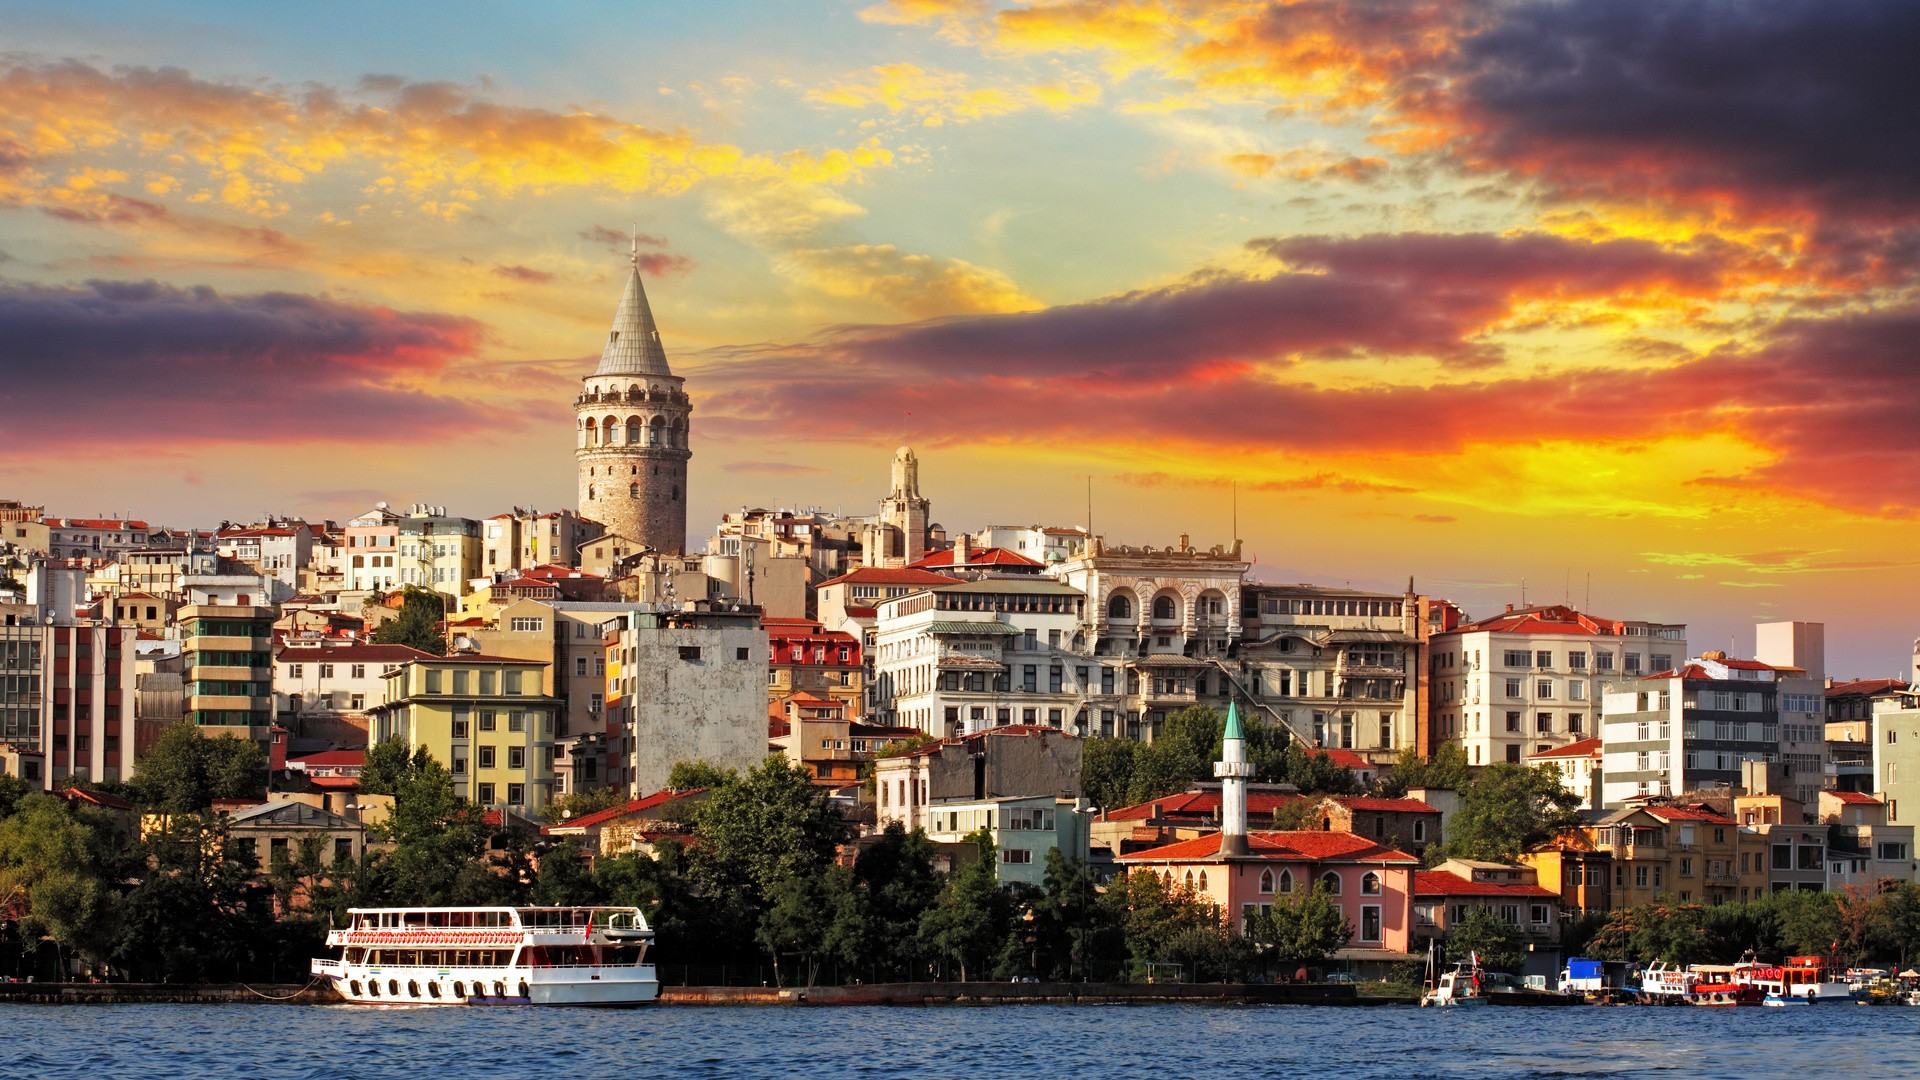 General 1920x1080 sunset architecture cityscape Istanbul Turkey building tower ship clouds old building trees water Galata Tower vibrant